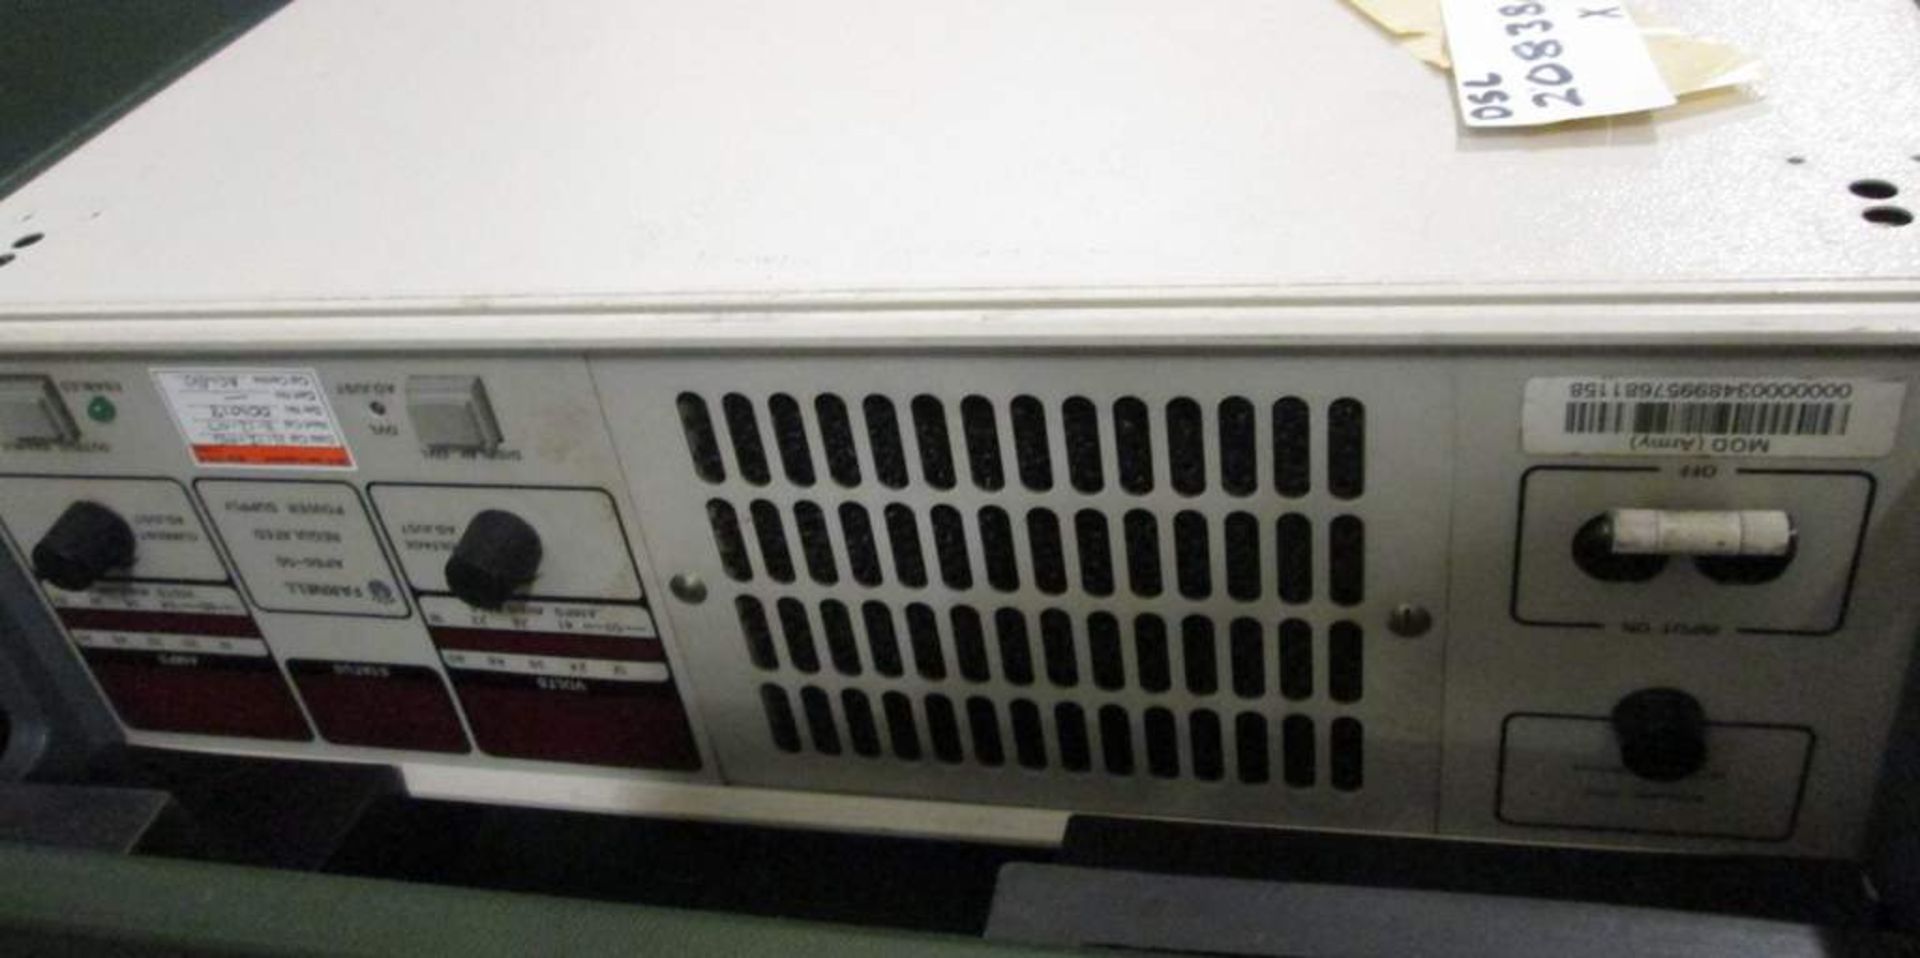 Farnell AP60-50 Power Supply - Image 2 of 2